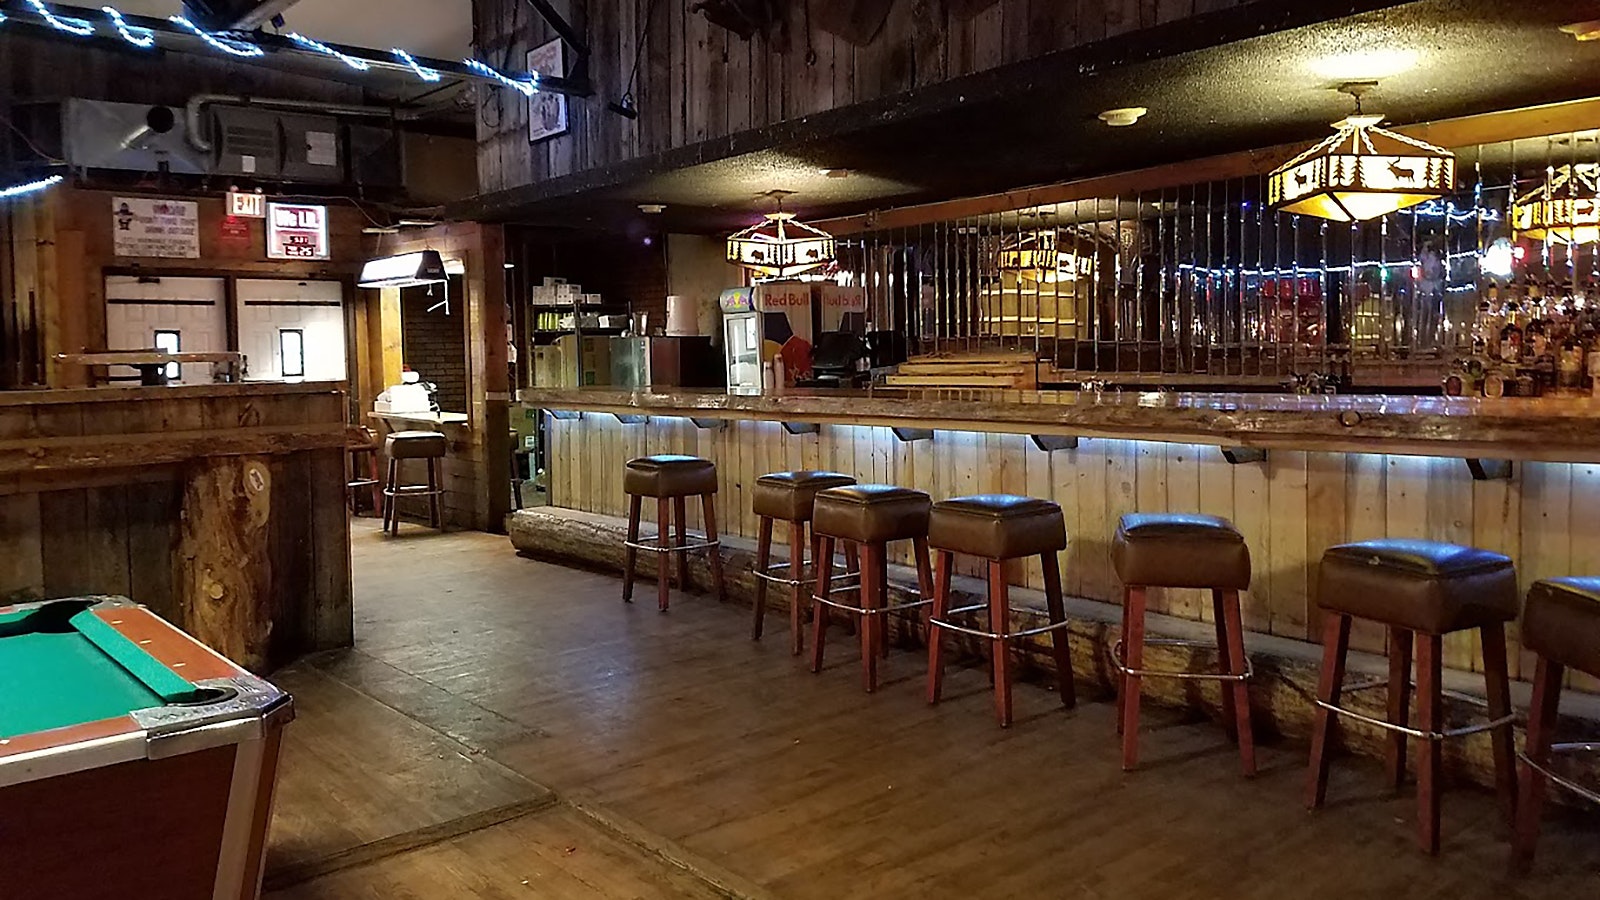 The bar at the Cowboy Saloon & Dance Hall in Laramie, Wyoming.